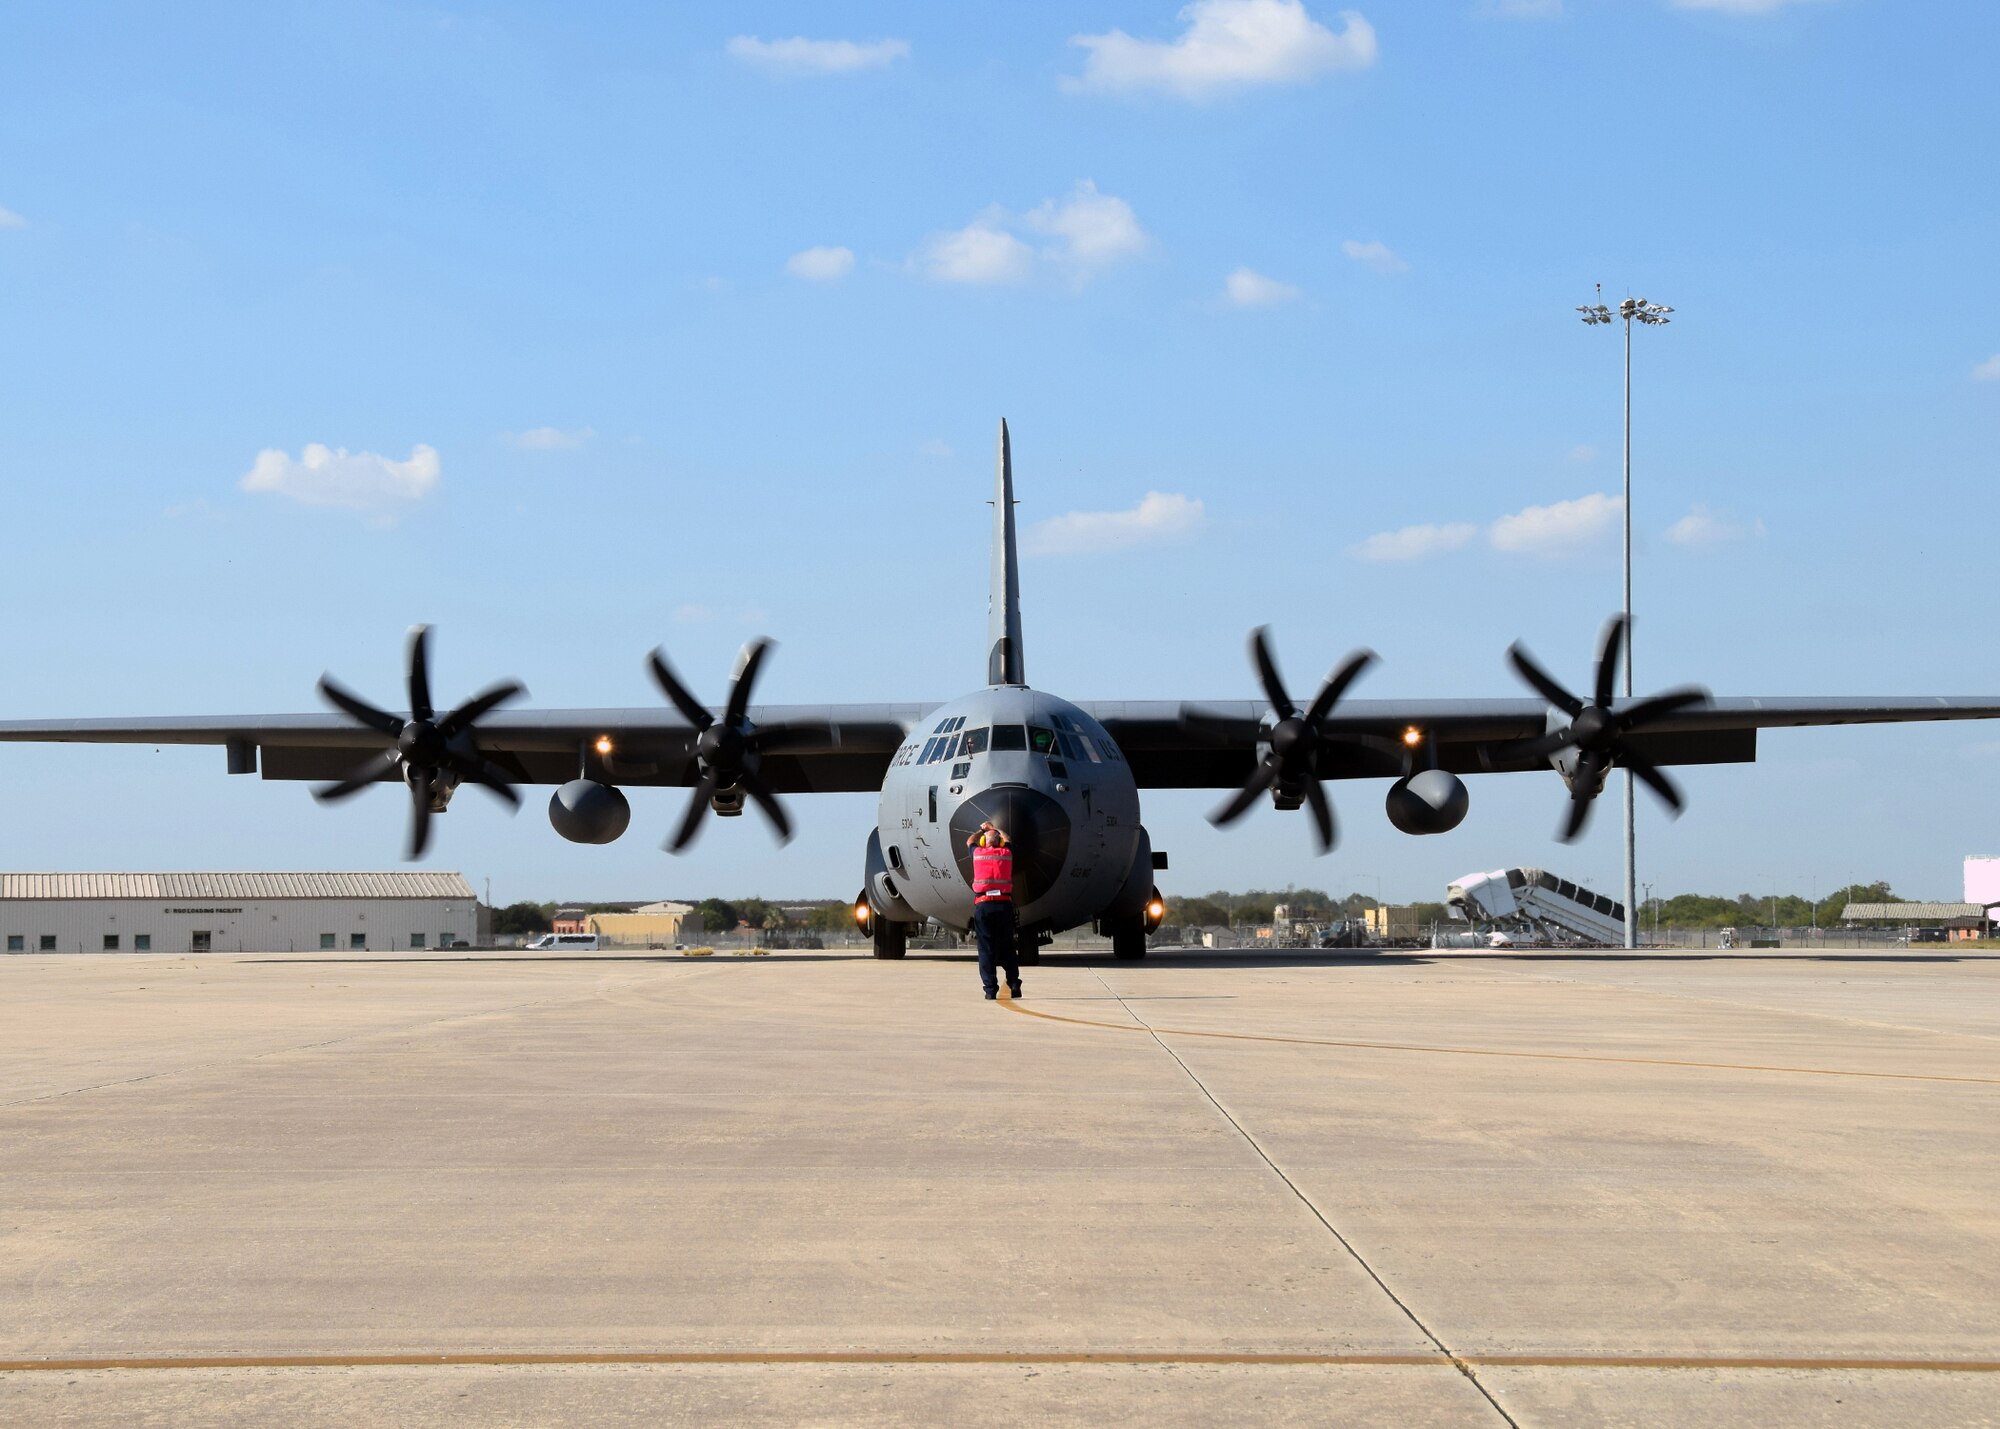 Robert Huth, Joint Base San Antonio transient alert marshaller, directs a WC-130J Hercules “Hurricane Hunter” weather reconnaissance aircraft from the 403rd Wing at Keesler Air Force Base, Mississippi, into a parking spot on the 433rd Airlift Wing ramp at Joint Base San Antonio-Lackland, Texas Oct. 6, 2020.